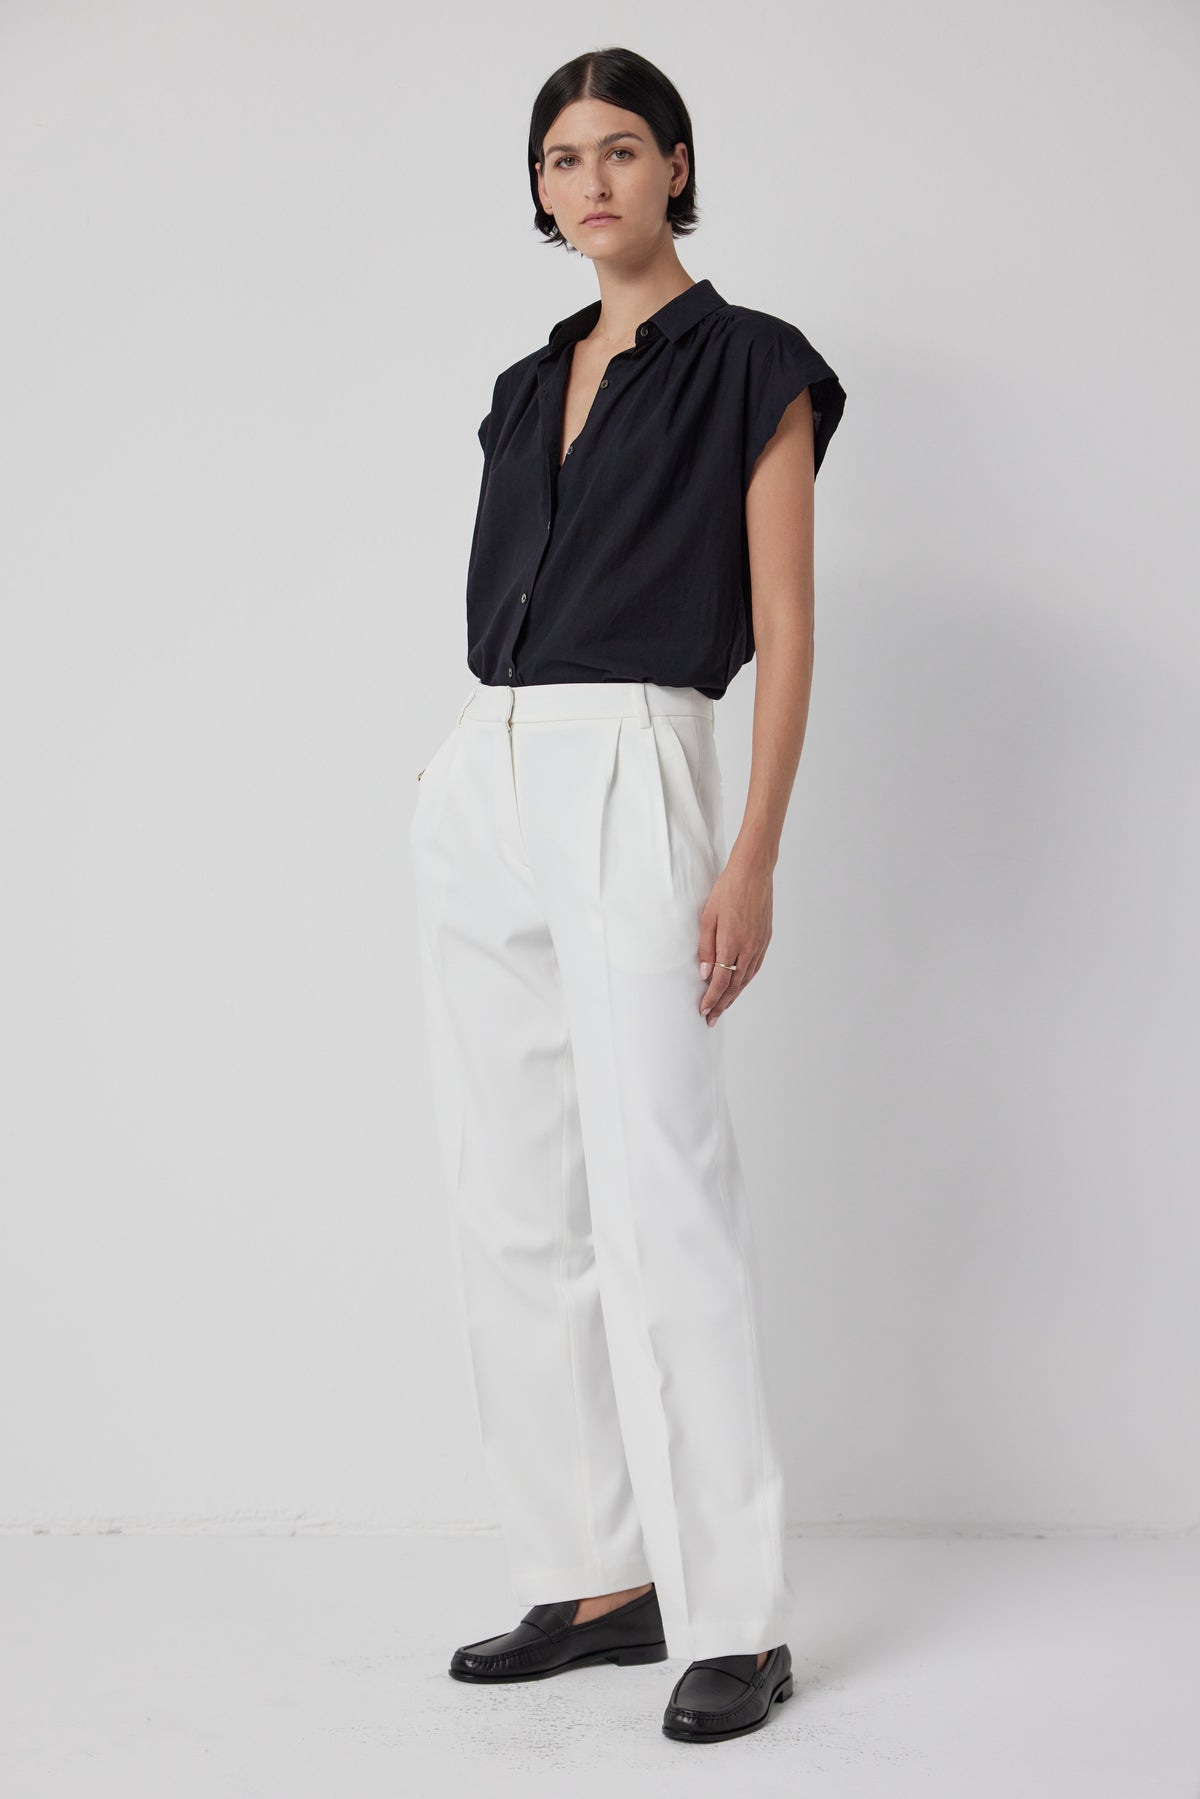 A woman standing against a white backdrop, wearing a black blouse, white Velvet by Jenny Graham relaxed fit BUNDY PANT trousers, and black loafers.-36524163563713